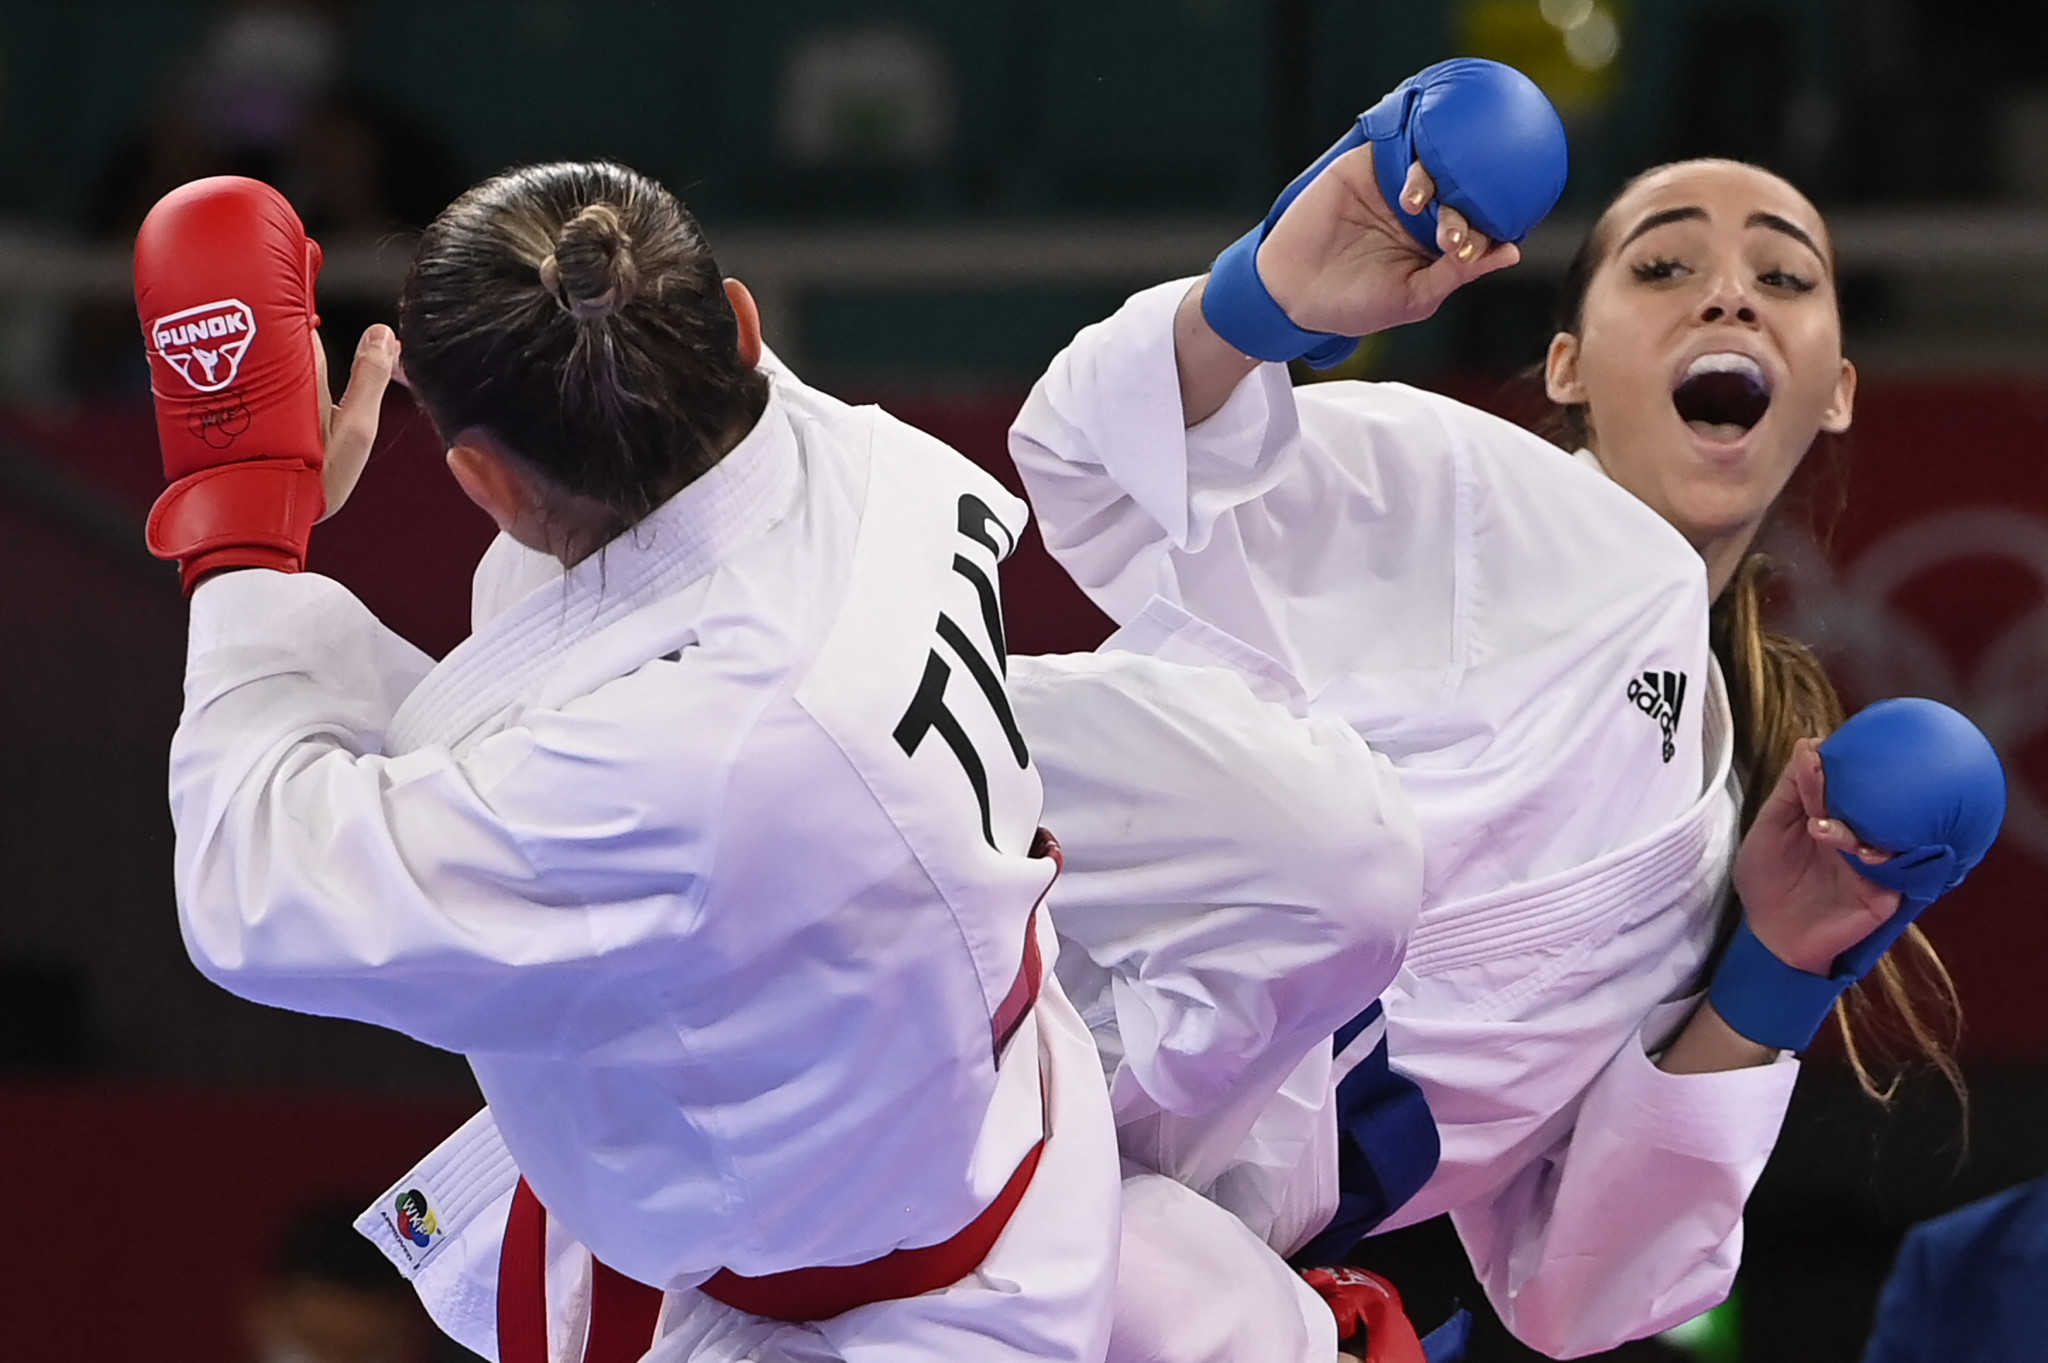 Claudymar Garcés, right, helped Venezuela to win women's team kumite gold at the Pan American Karate Championships ©Getty Images